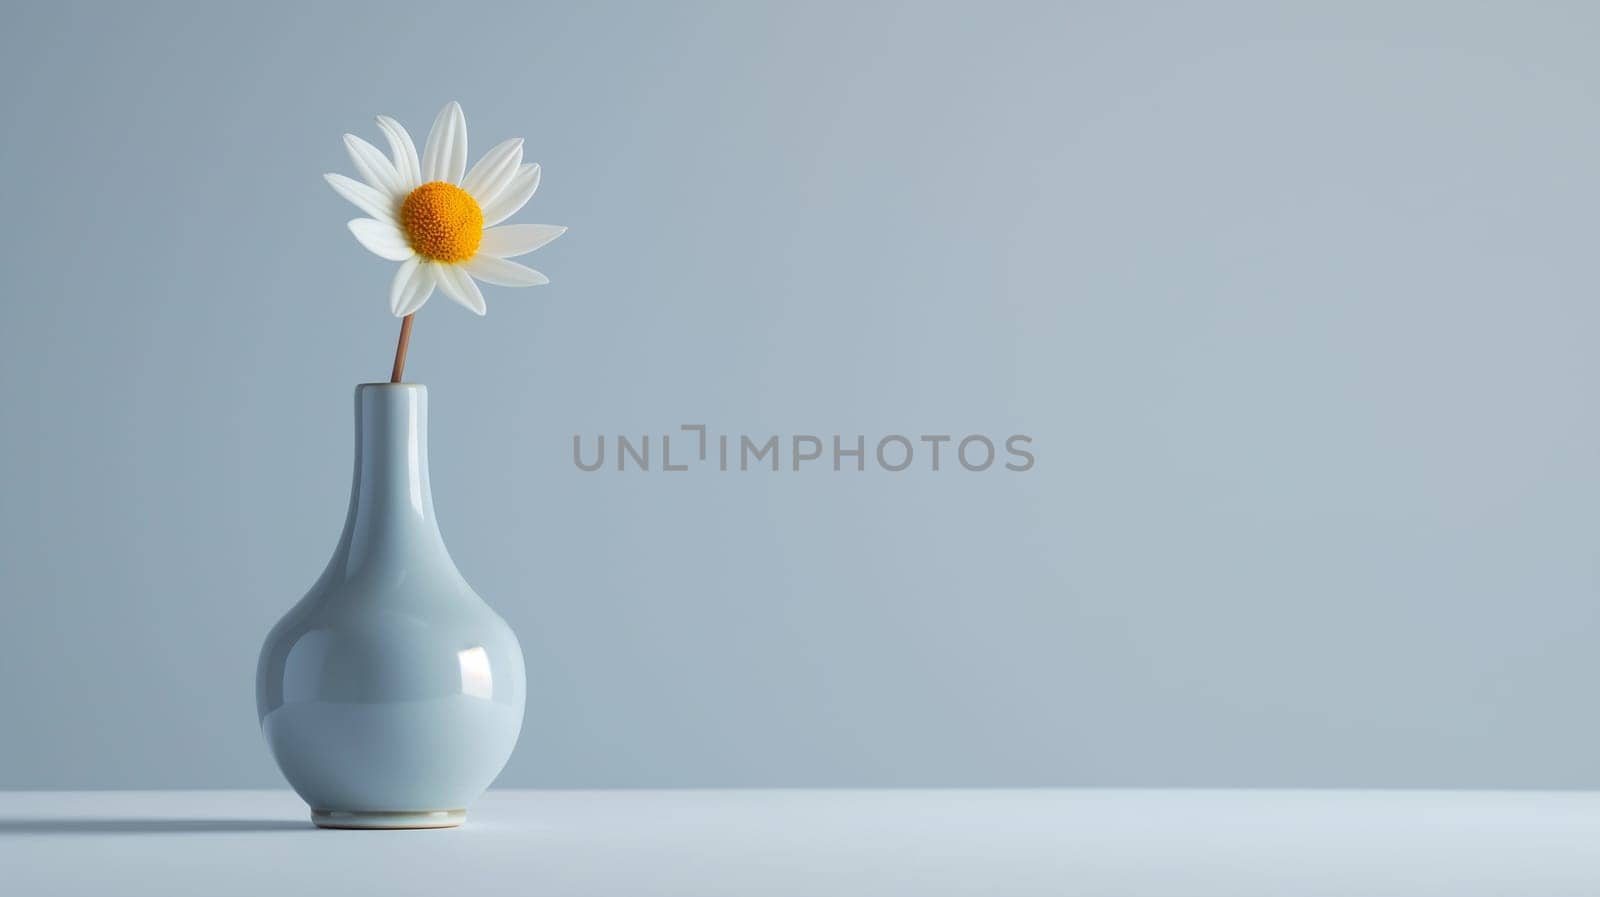 A single white daisy with a bright yellow center stands in a pale blue vase on a white surface, highlighted by soft, natural lighting - Generative AI